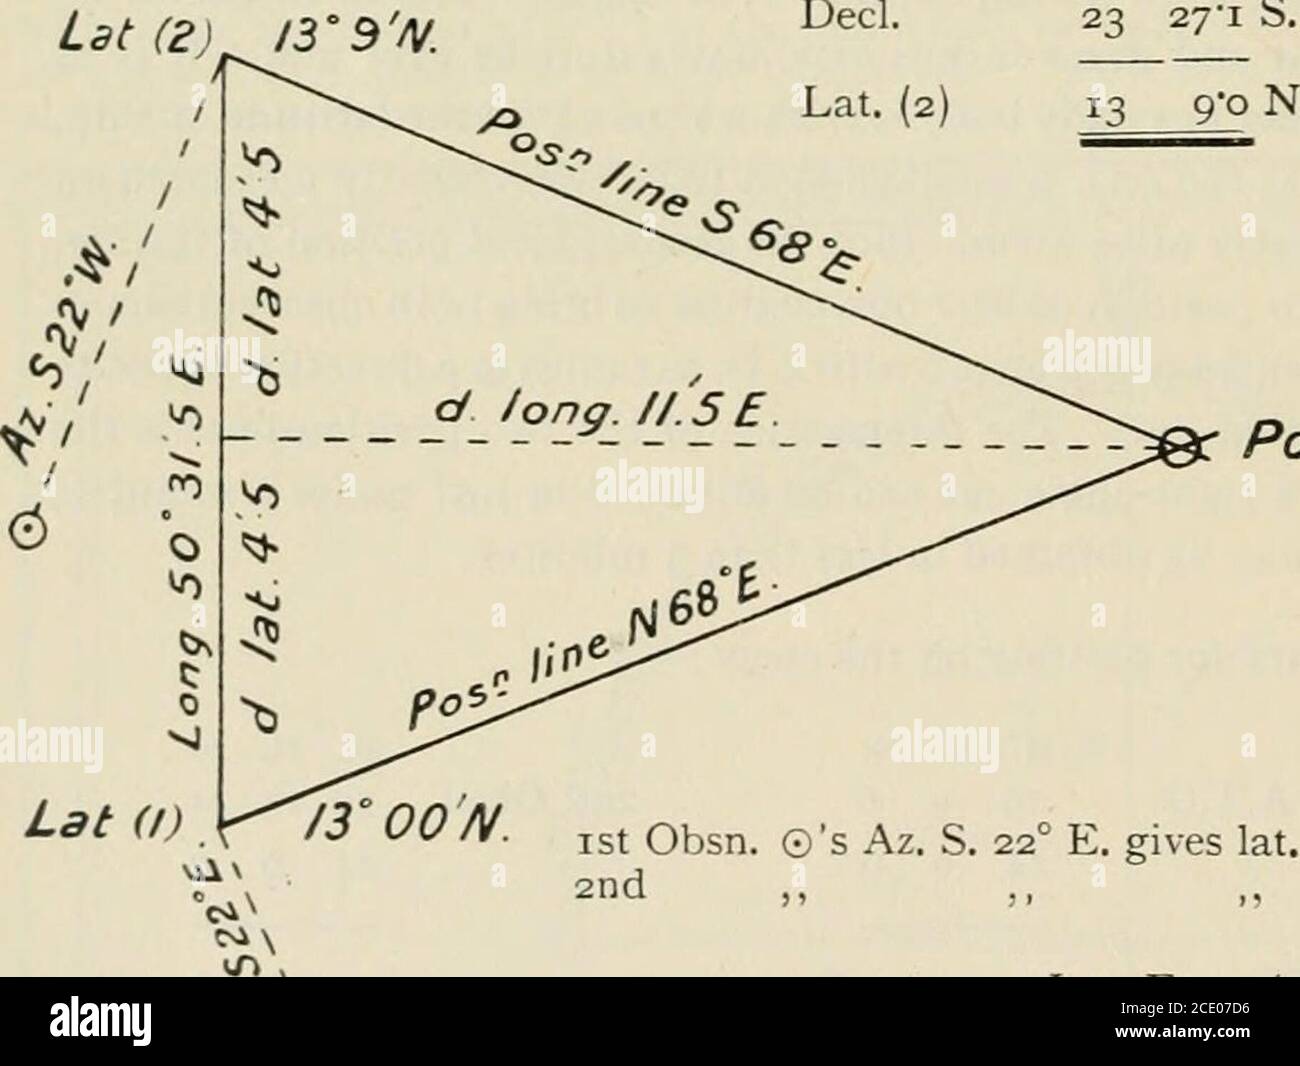 . Tables of calculated hour-angles and altitude azimuth table 30N. to 30S. : ex-meridian tables 60N. to 60S. and calculated reductions ans azimuths of bright stars from 1 hour to 3 hours from Meridian / c by H.S. Blackburne . D. H. M. s.M.T. Green. 21 19 34 26Long. 51° E. +3 24 00 M.T. Sp.Eq. Time A.T. Sp. H.A. 21 22 58 + 1 26 34 23 00I 00 0000 .M. AT Ship. Obsd. Alt. © 5042 ft. Cor. 350 s. + 9*2 M. S. Eq. of Time i 289Cor. +5S Var. S. H. 1-25 X 4-4 5-50 True Alt. -©^ 50Redn. 2 44-2507 Cor. Eq. T. i 34*4 Men Alt. 53 34-9 S. M.Z. Dist. 36 25-1 N. Dec]. 23 2yi S. Lat. 12 58-0 N.Run For Reduction Stock Photo